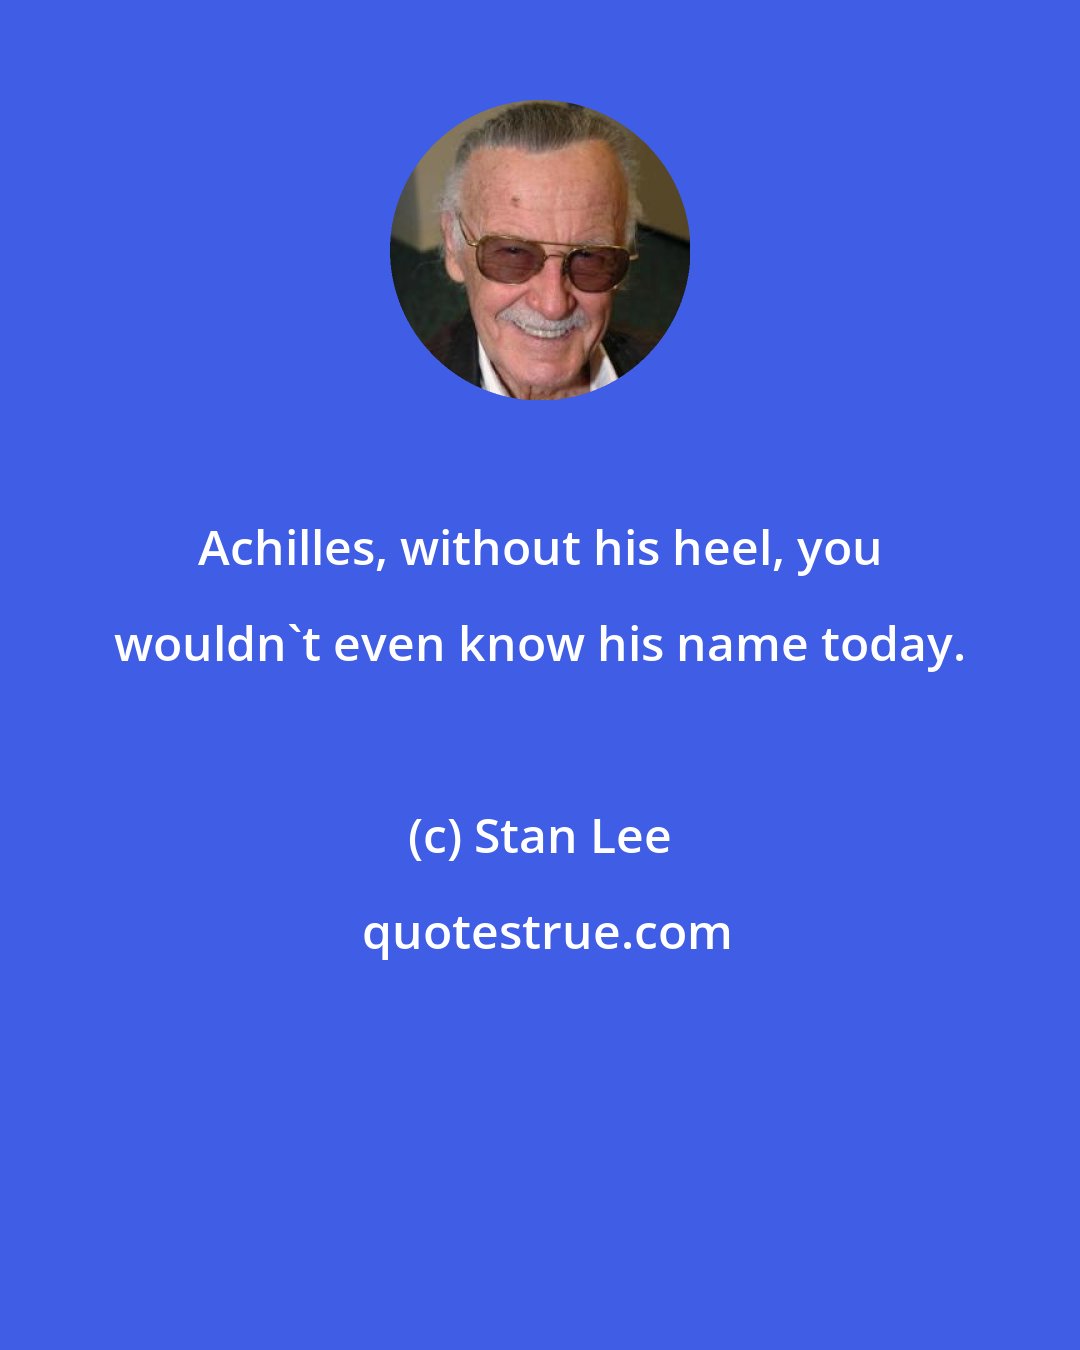 Stan Lee: Achilles, without his heel, you wouldn't even know his name today.